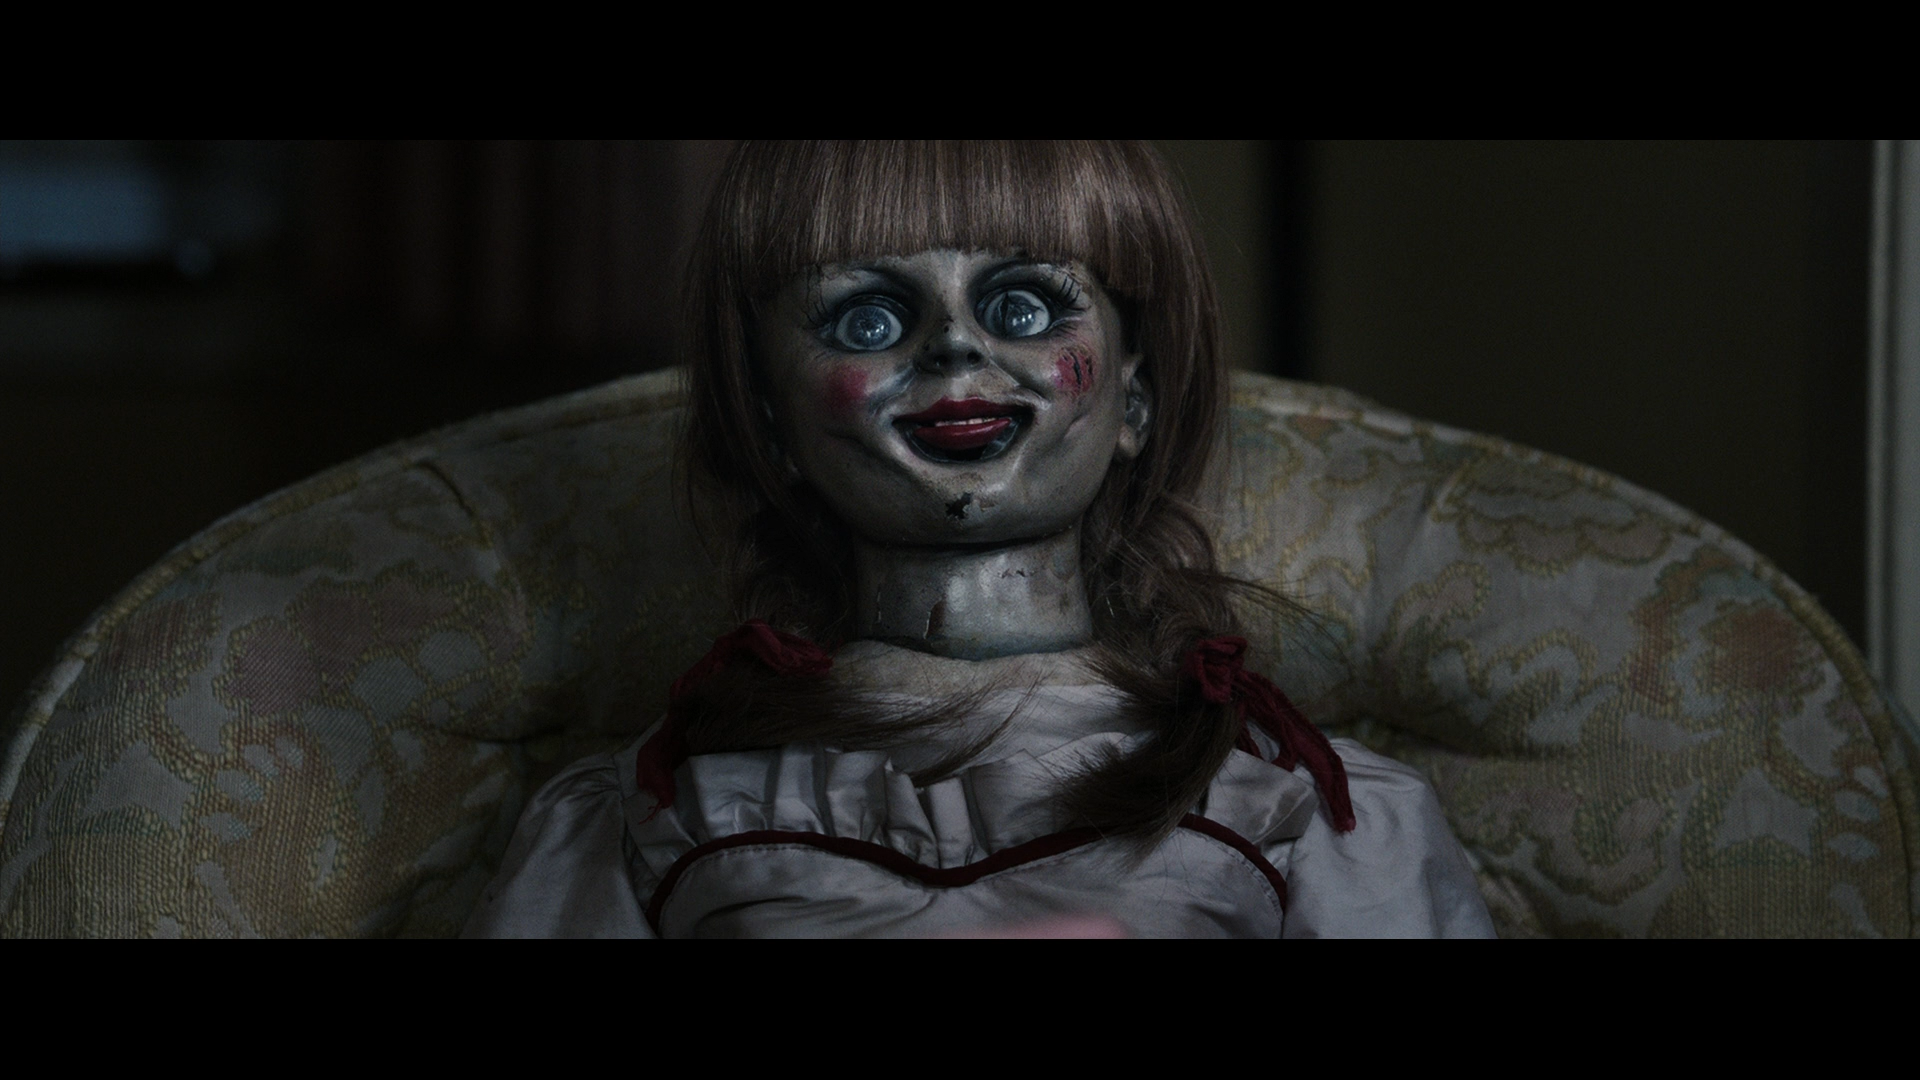 The Conjuring Hd Wallpaper Conjuring Pinterest Hd - Annabelle 3 Release Date , HD Wallpaper & Backgrounds